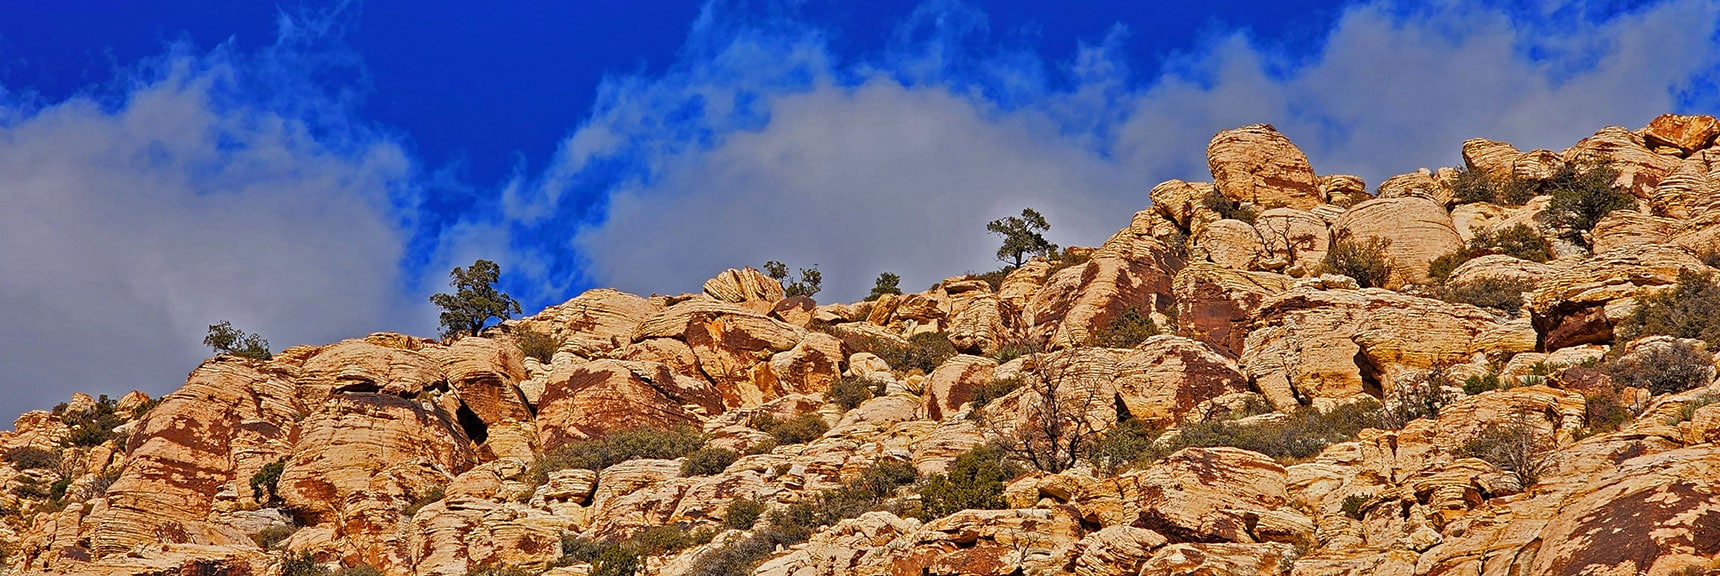 Southeast Summit Area Lit Up by Full Sun | White Rock Mountain Loop Trail | Red Rock Canyon, Nevada